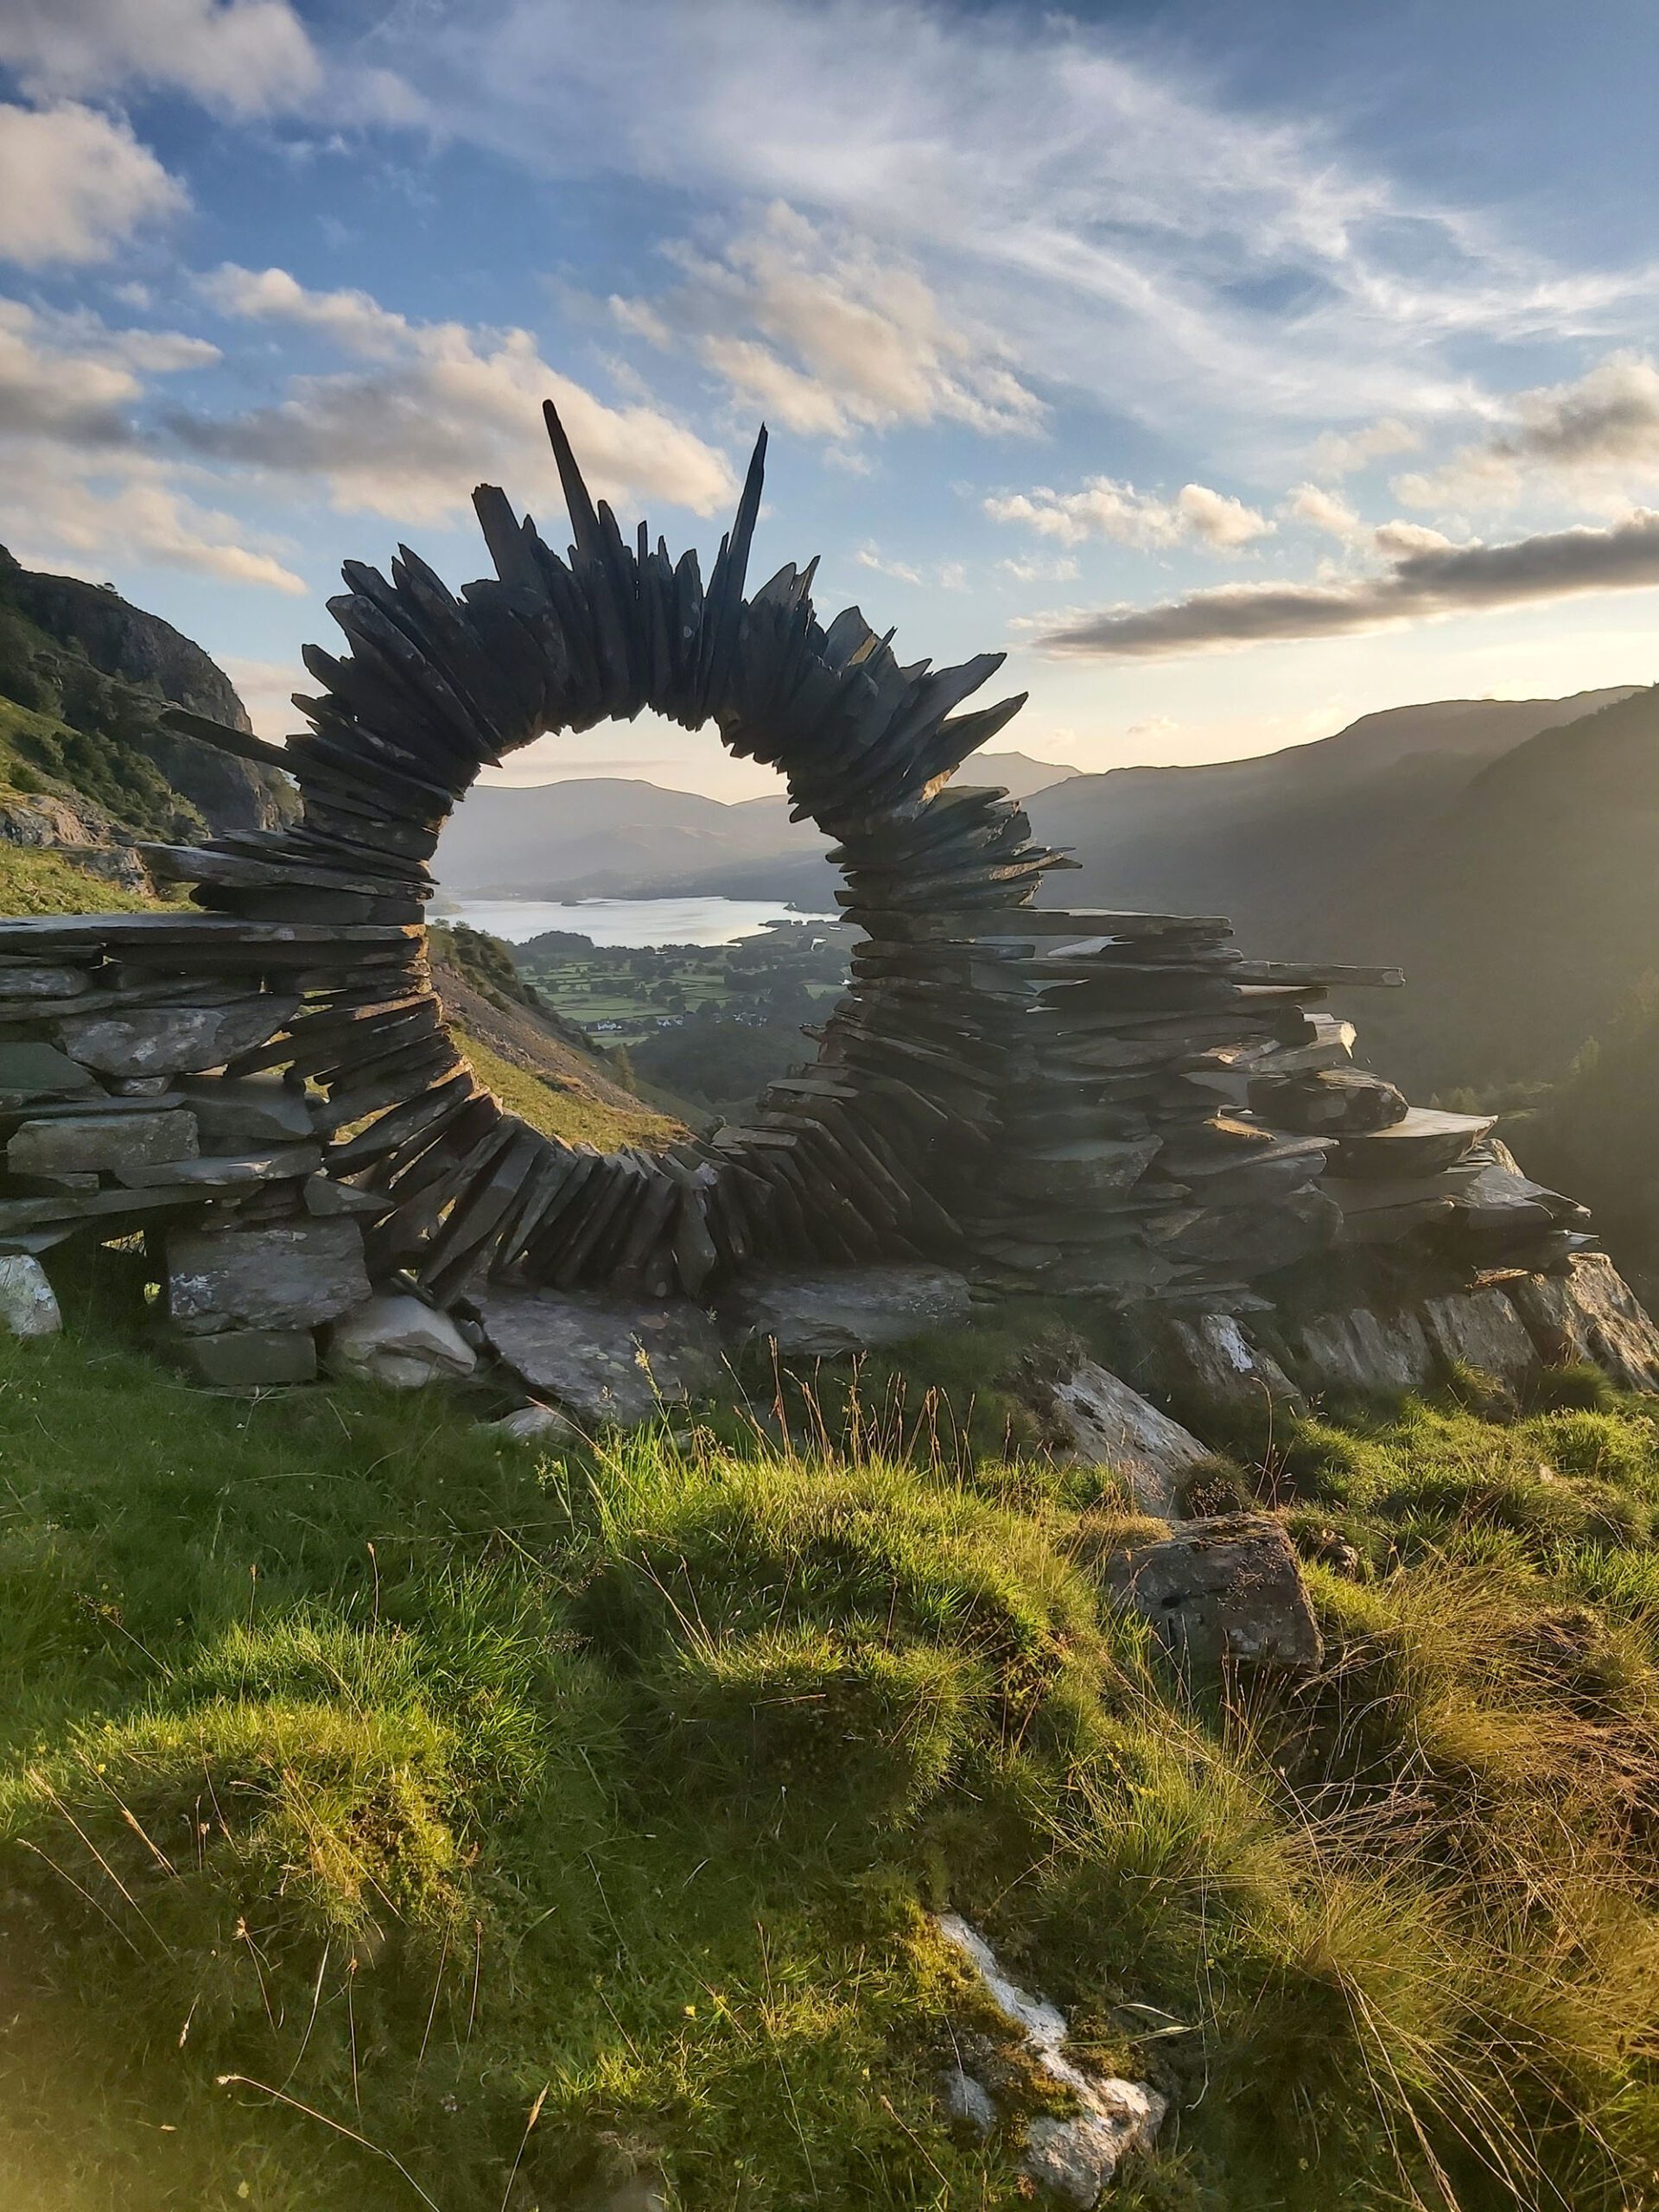 Pictures show an amazing piece of artwork made out of slate, created by a mystery artist who has now been dubbed the 'Borrowdale Banksy'. Daniel Farrington, 30, and wife Agnieszka, 34, came across the slate ring in Borrowdale, Cumbria,. around sunrise on Monday, August 1, 2022. (Daniel Farrington,SWNS/Zenger)